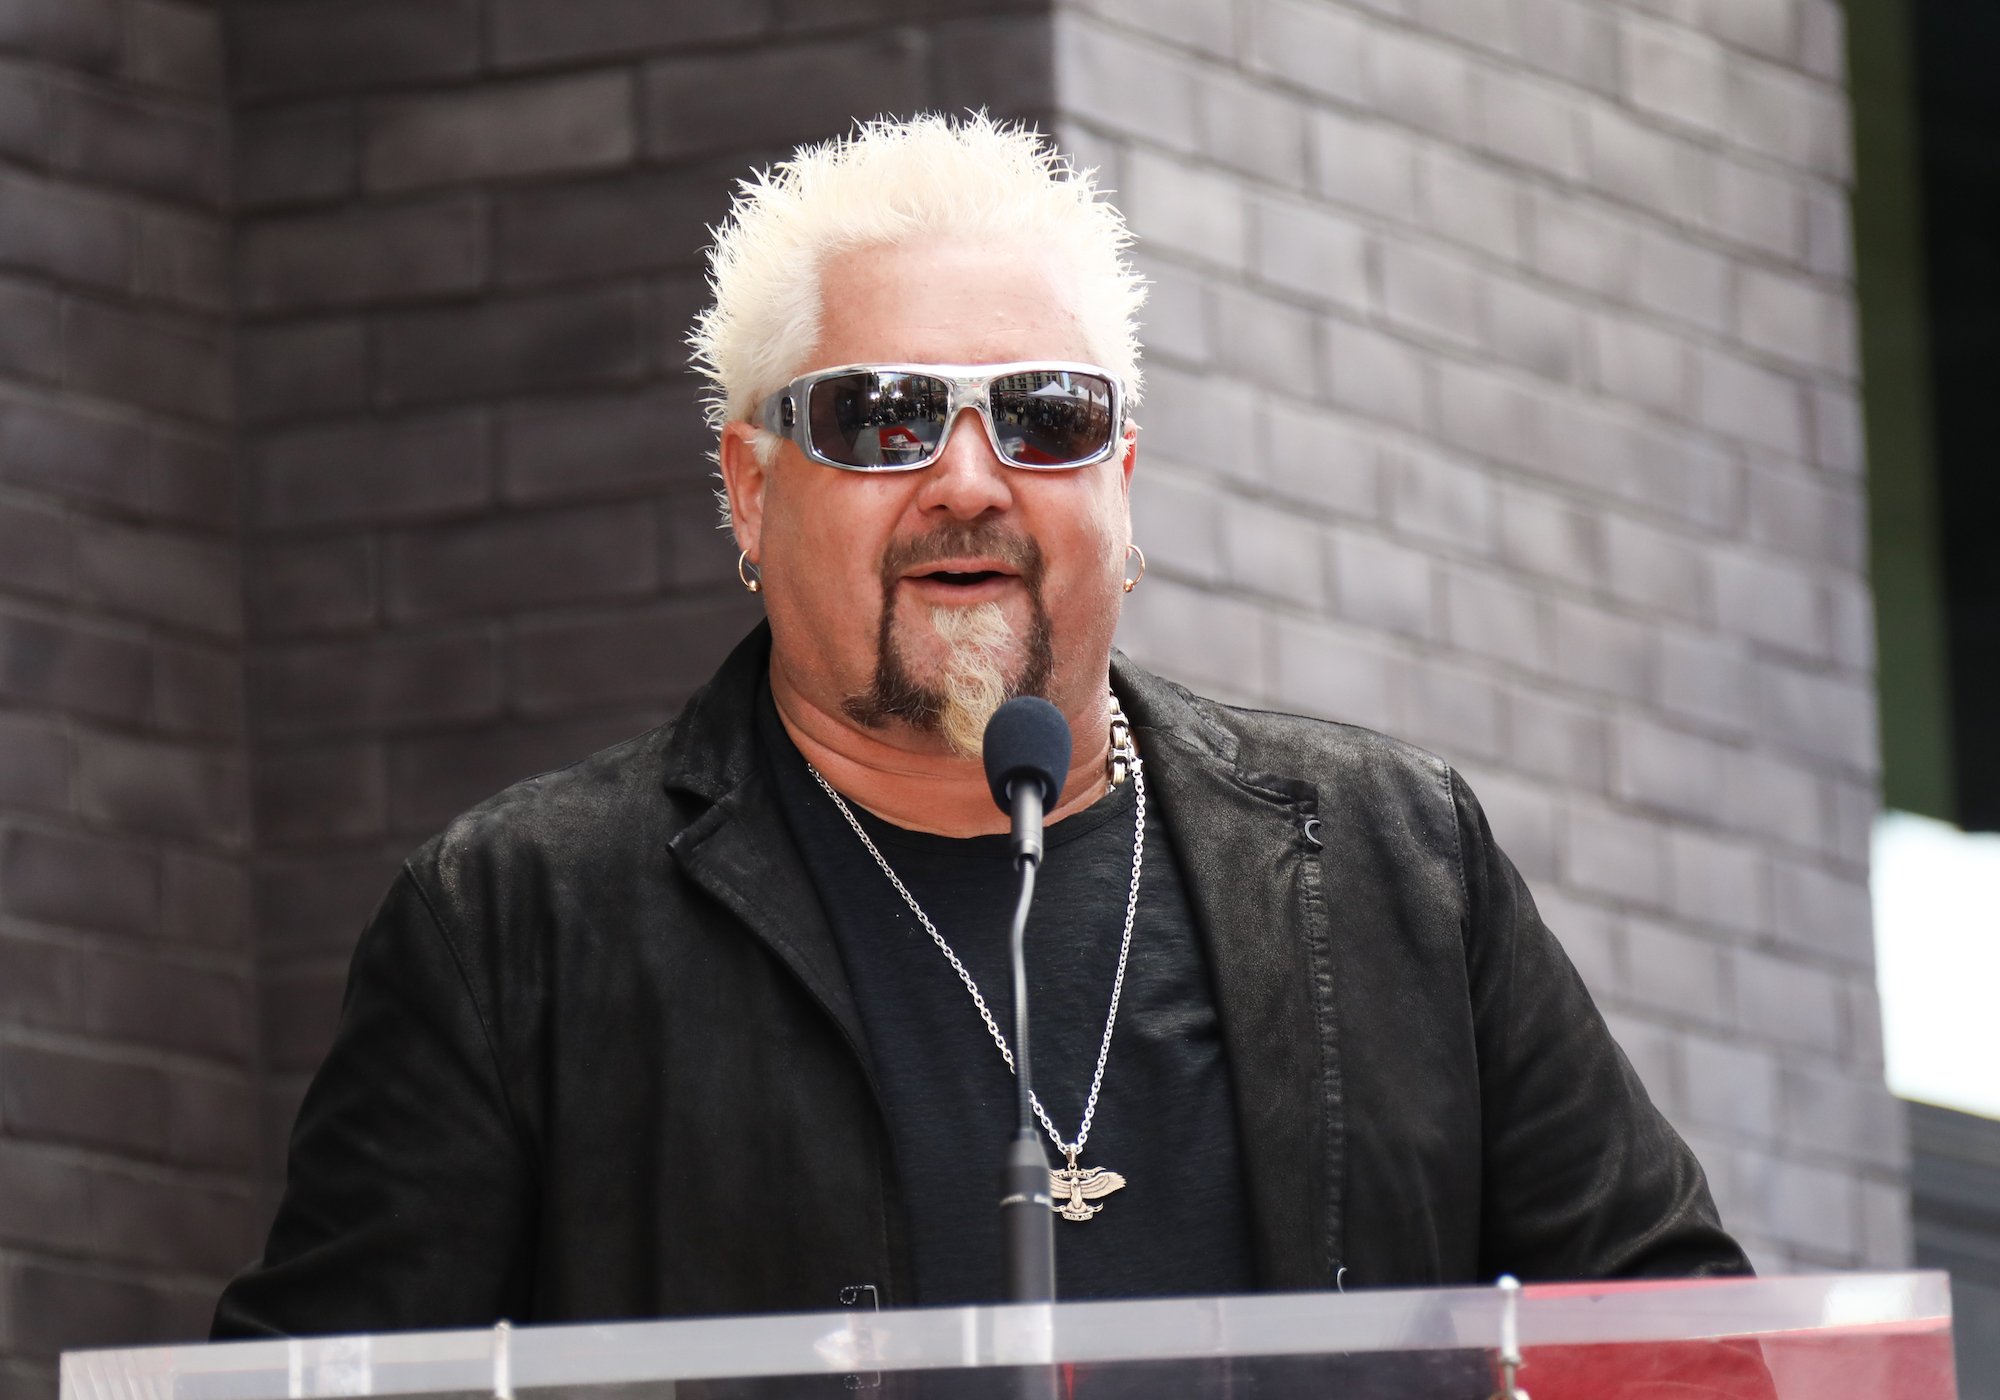 Guy Fieri wearing sunglasses at Hollywood Walk Of Fame ceremony